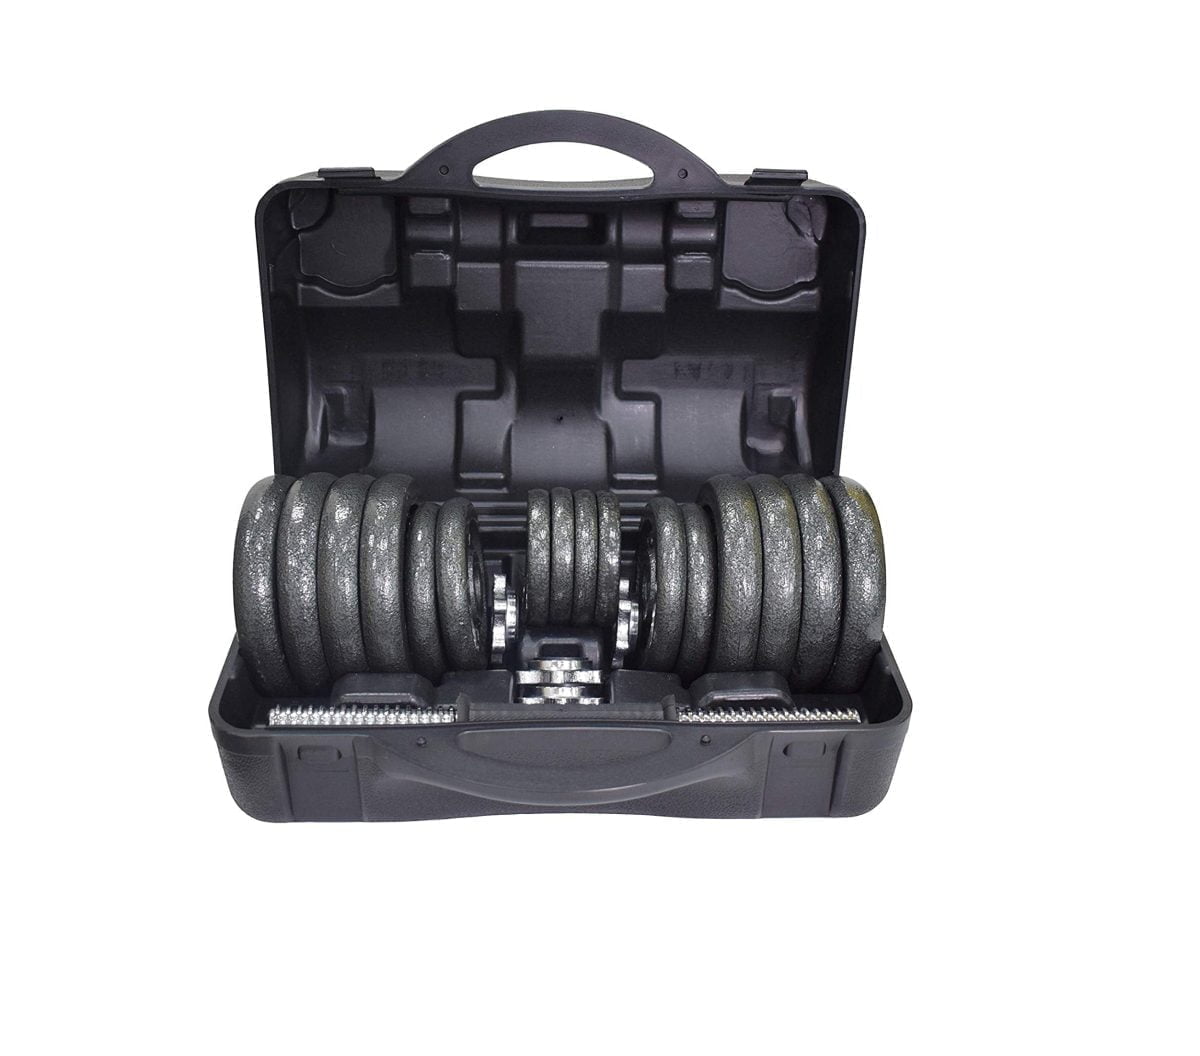 81Ogqeugkbl. Ac Sl1500 The Fitness 30 Kg Cast Iron Dumbbell Set Is Designed For Home Toning And Strength Workout Usage. The Traditional 1″ Standard Cast Plate Design Is Easy To Pick Up And Load Onto The Bars With The Quality Spinlock Collars Ensuring A Safe And Secure Fit On The Bar, Along With Quick Plate Changes. The Knurled Black Dumbbell Sleeves Ensures A Great Grip Whilst Working Out. The Dumbbell Set Can Be Used For A Wide Range Of Exercises To Help Pump Your Muscles And Tone Your Arms. Dumbbell Set 30 Kg With Case